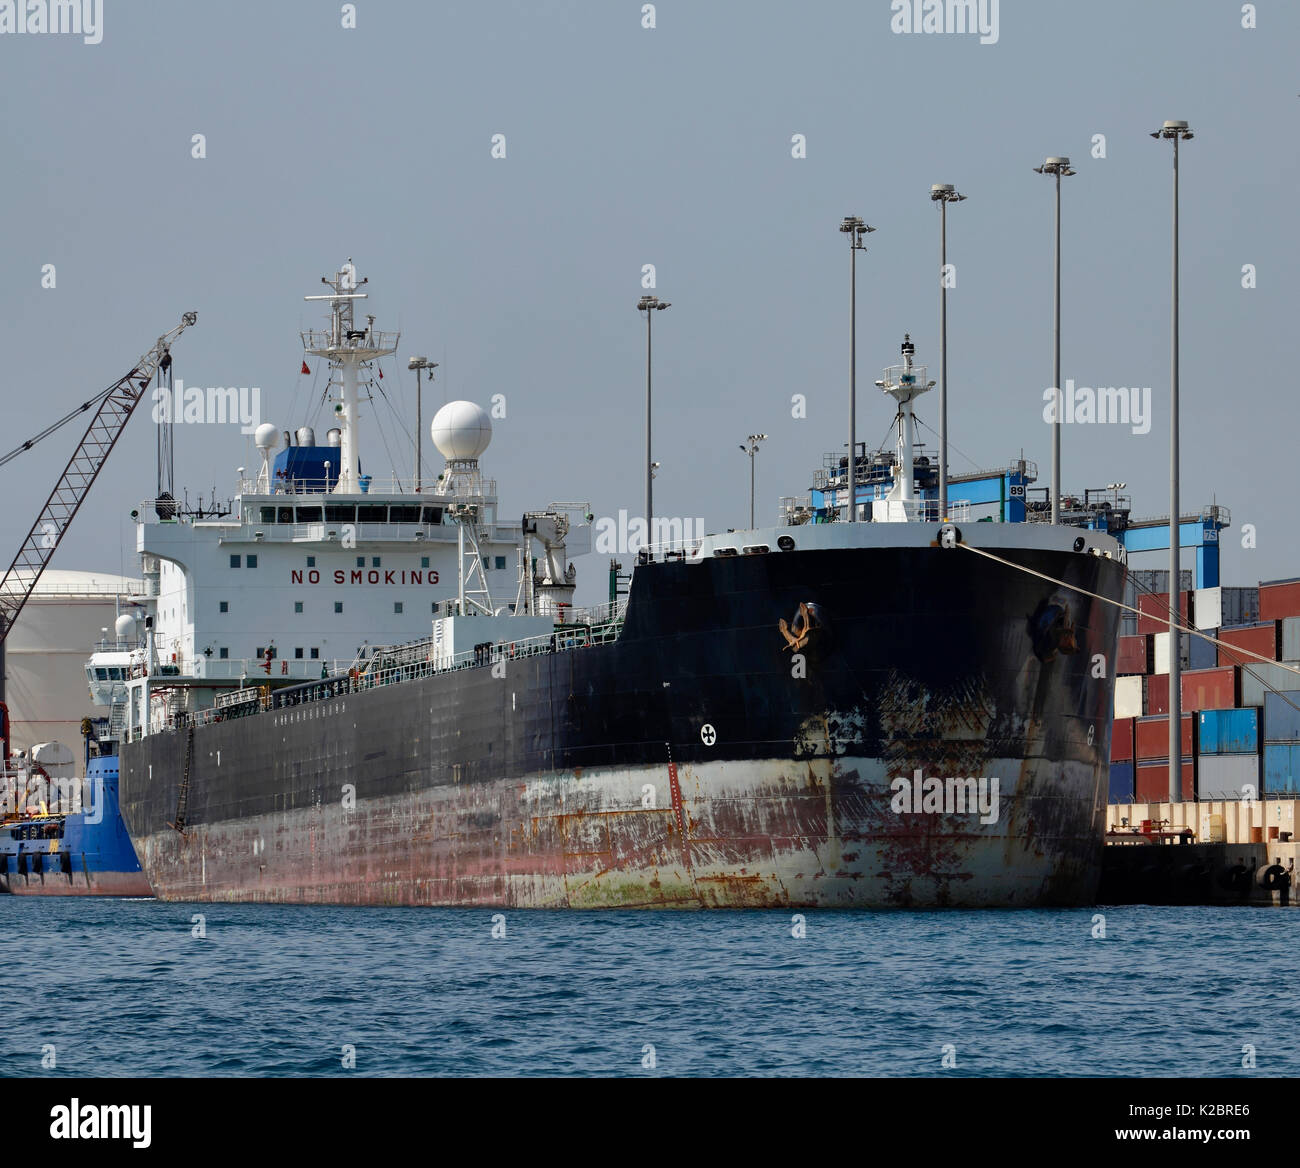 Empty oil tanker docked at Marsaxlokk, Malta. All non-editorial uses must be cleared individually. Stock Photo